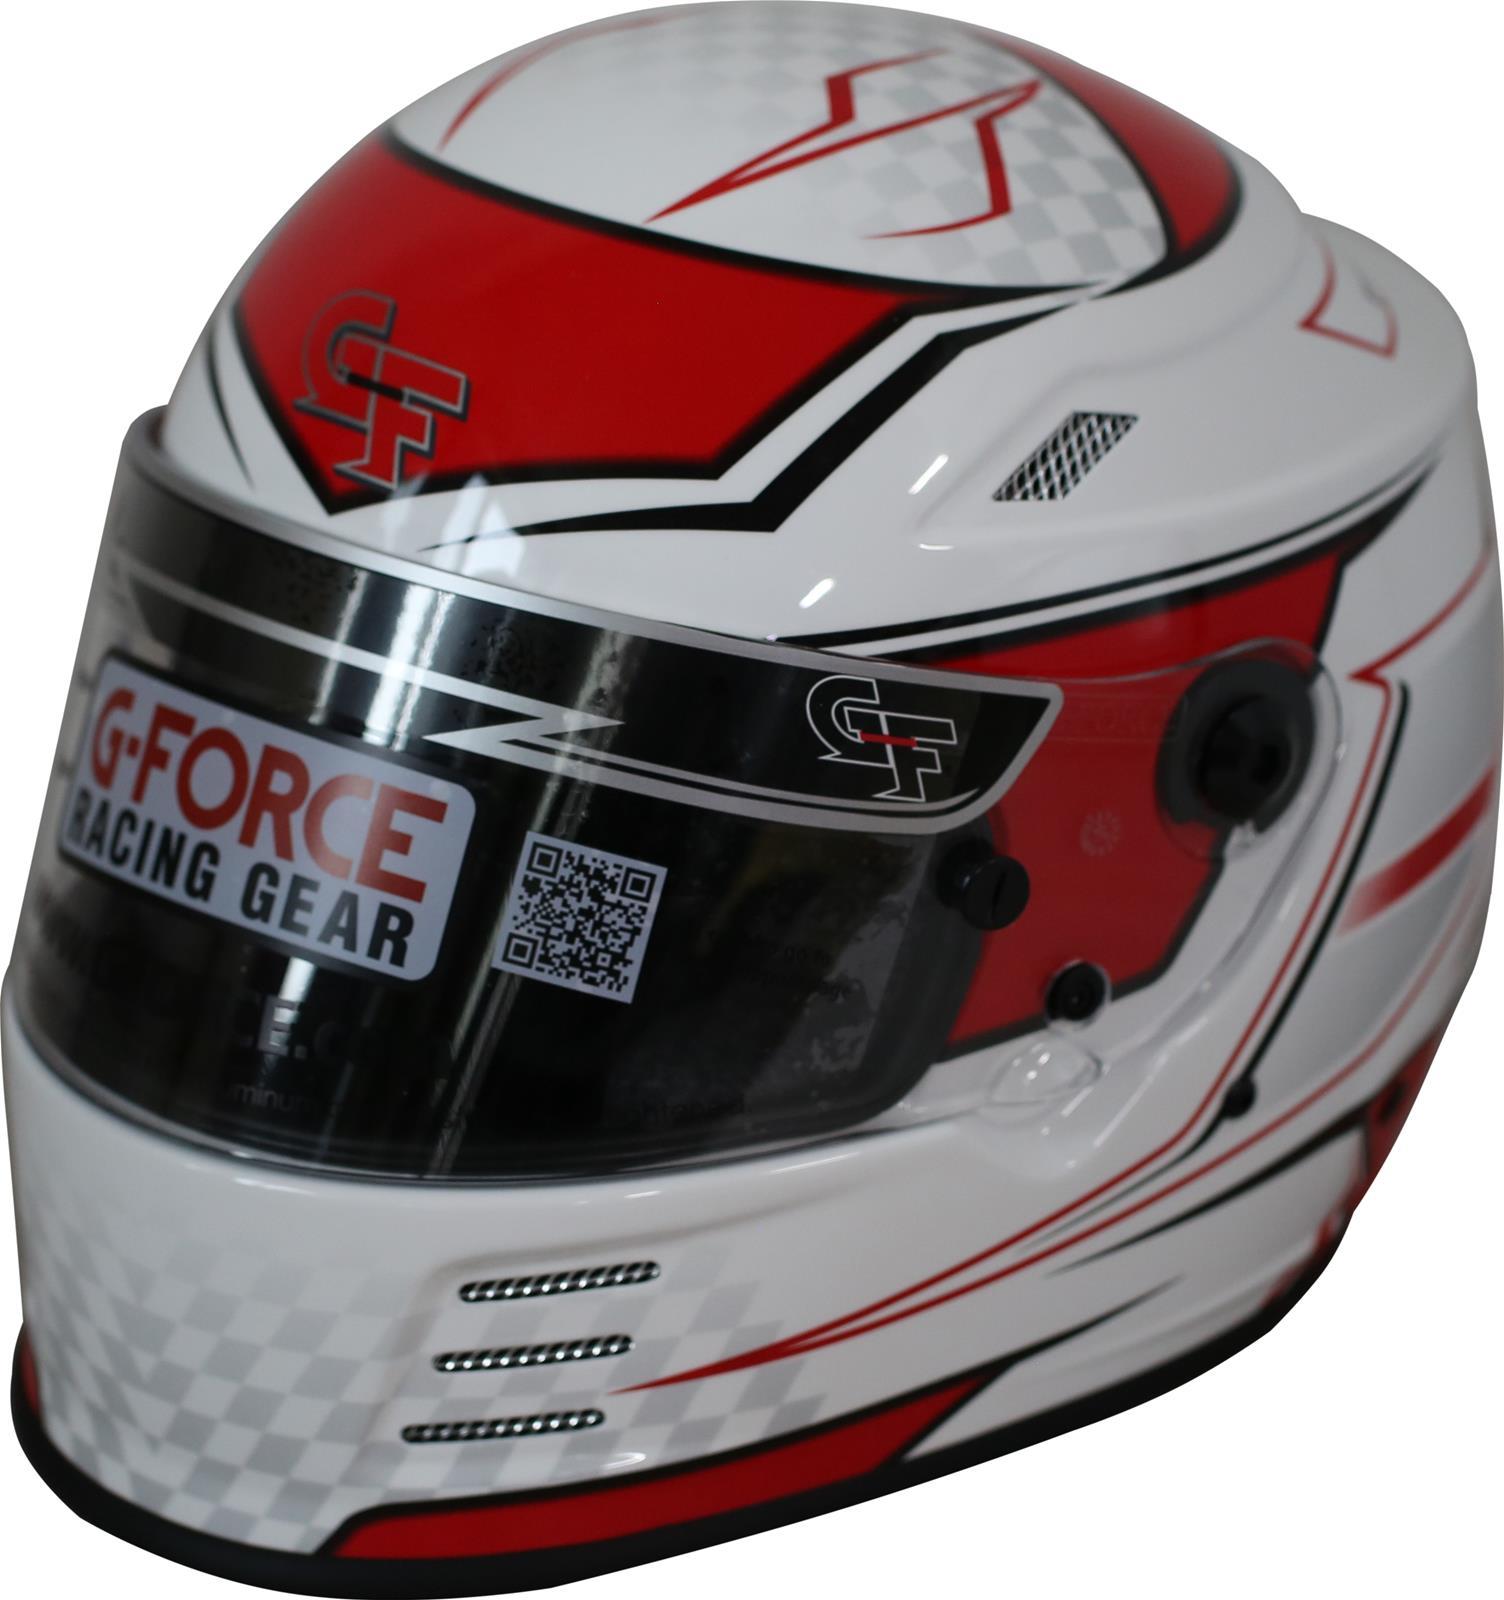 G-Force HELMET REVO GRAPHICS MED RED SA2020 Helmets and Accessories Helmets main image